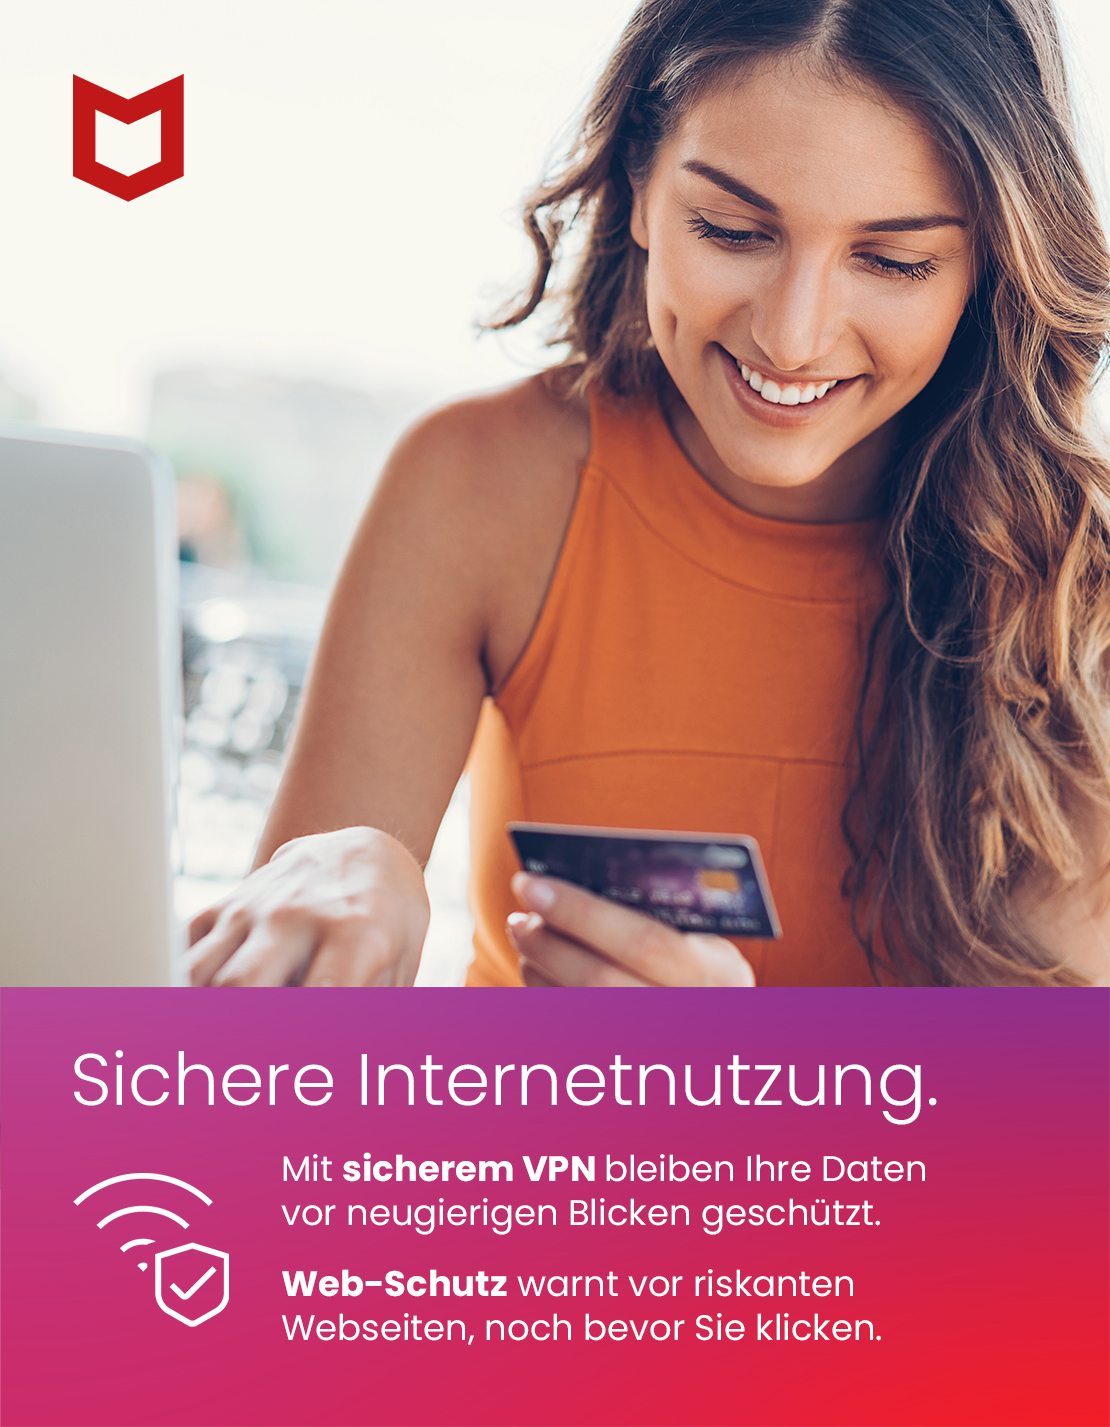 McAfee Total Protection 2024 - 5 Geräte - 1 Jahr inkl. VPN / ESD